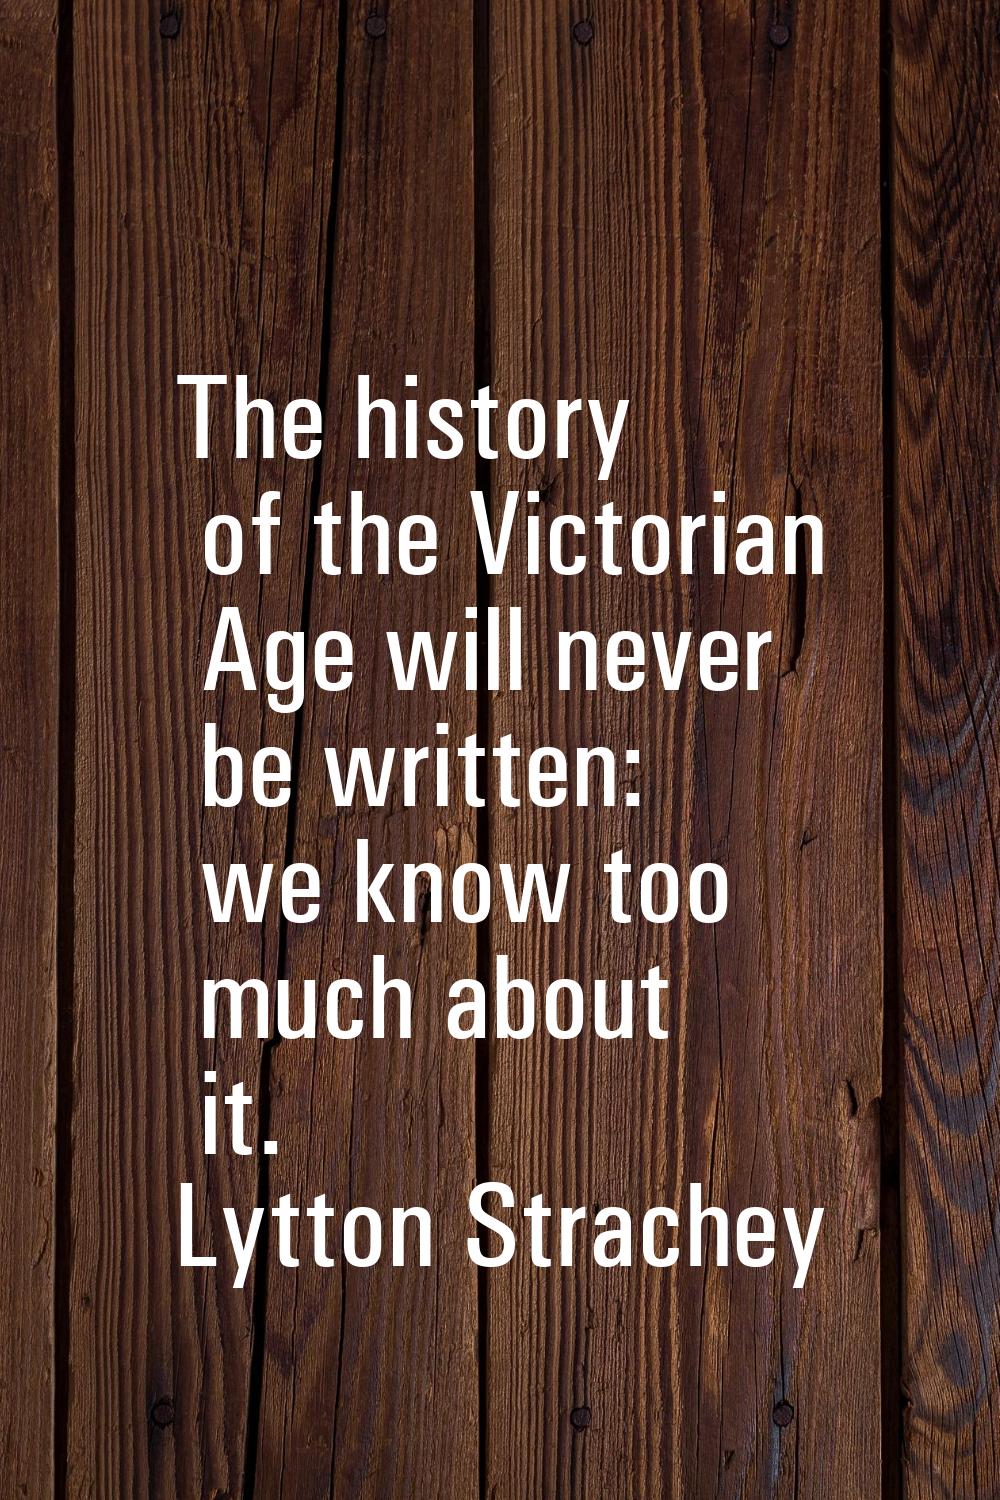 The history of the Victorian Age will never be written: we know too much about it.